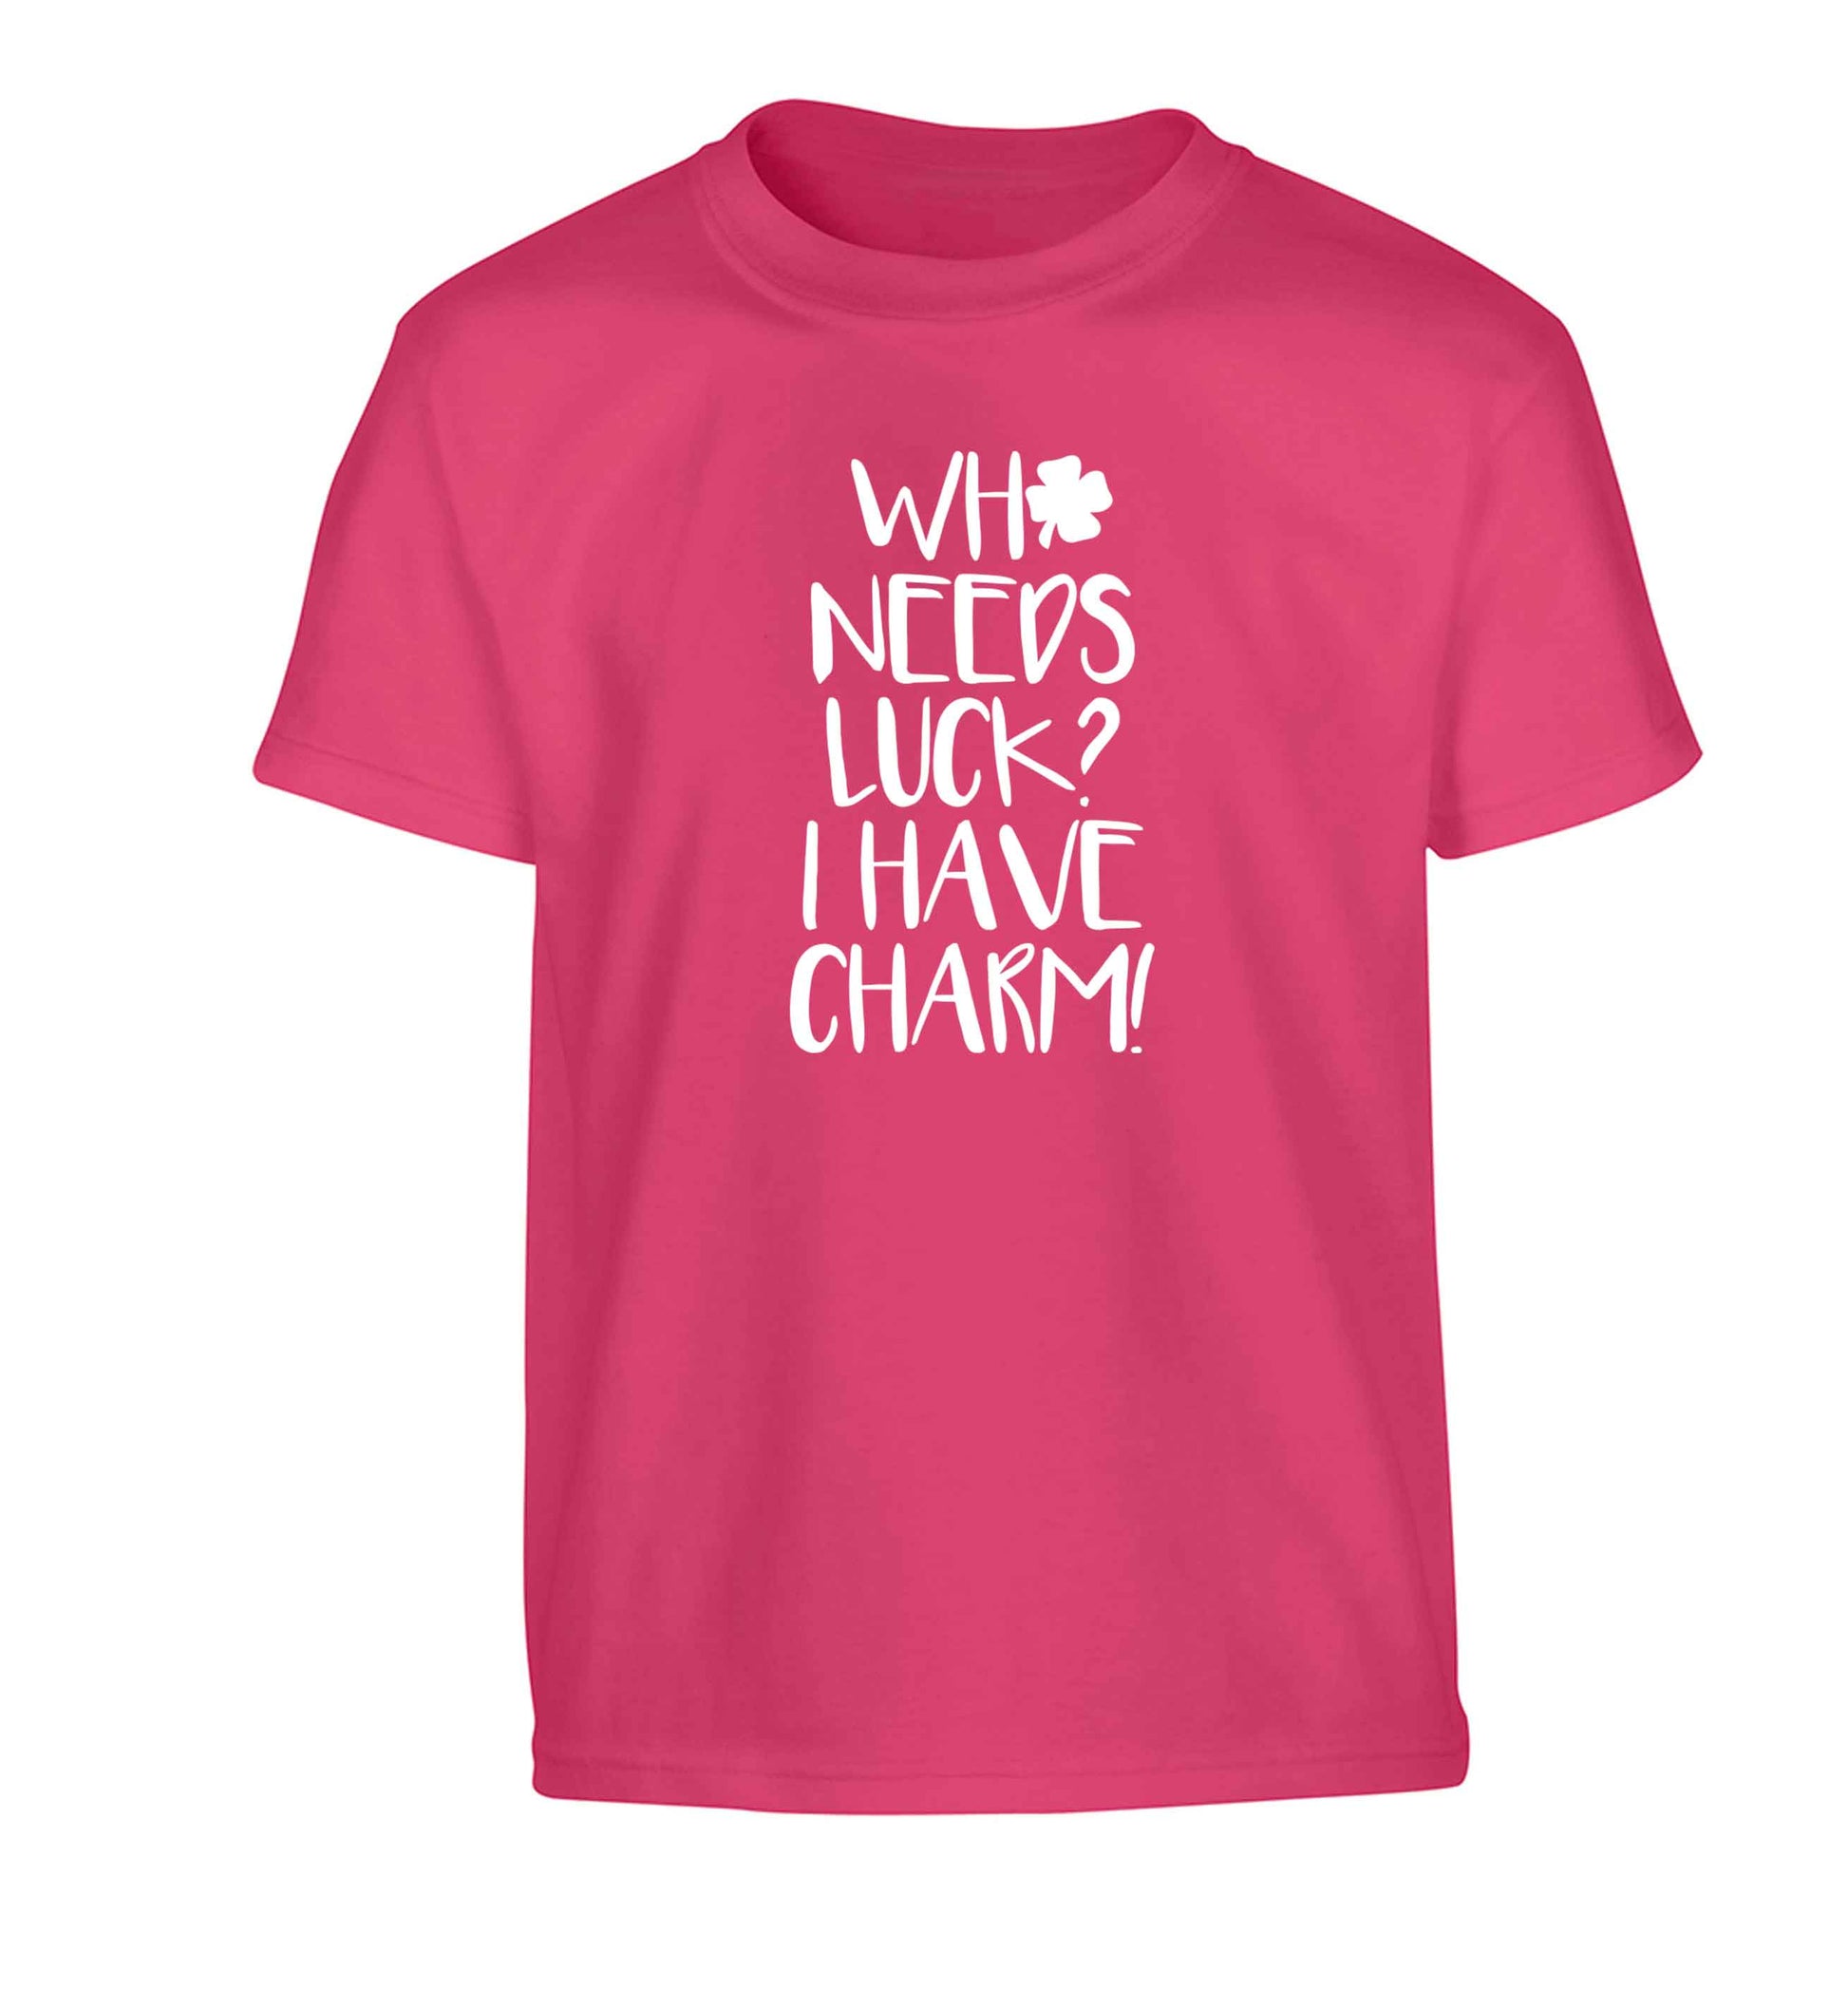 Who needs luck? I have charm! Children's pink Tshirt 12-13 Years